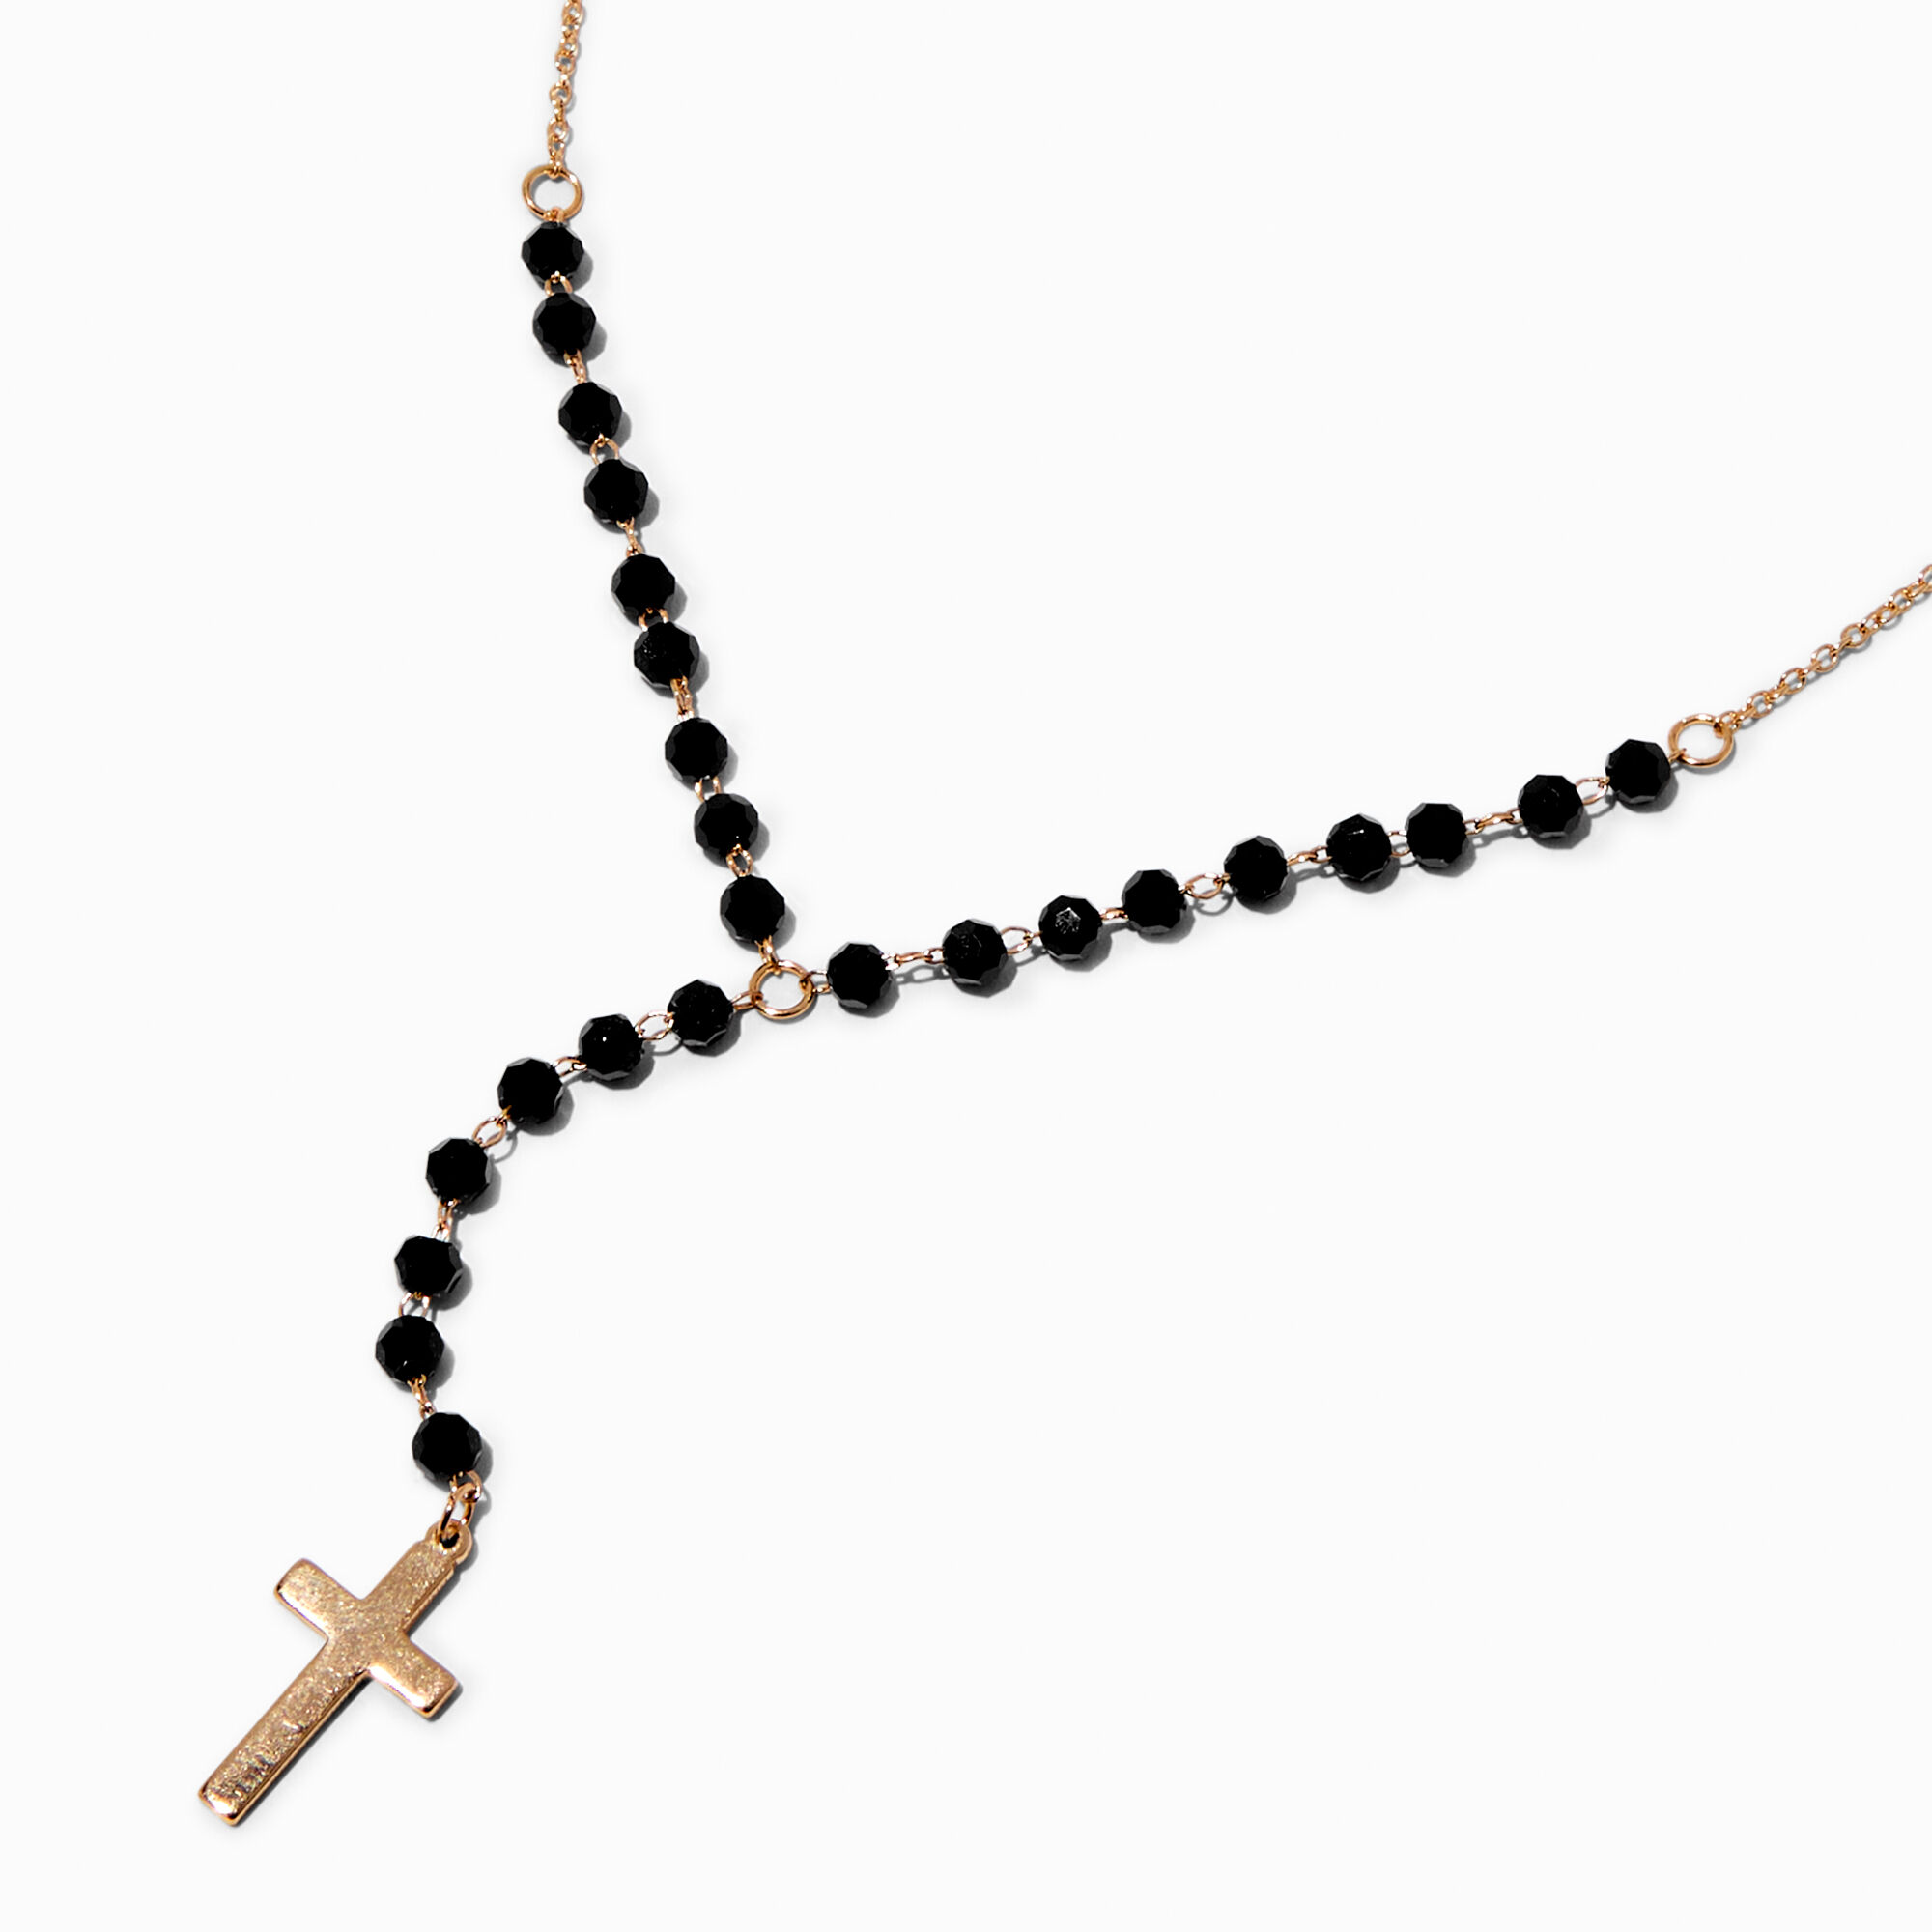 8mm Black Bead Christian Catholic Rosary Men Women Long Hematite Cross  Pendant Necklace Handemade Unique Religious Jewelry Gifts – the best  products in the Joom Geek online store